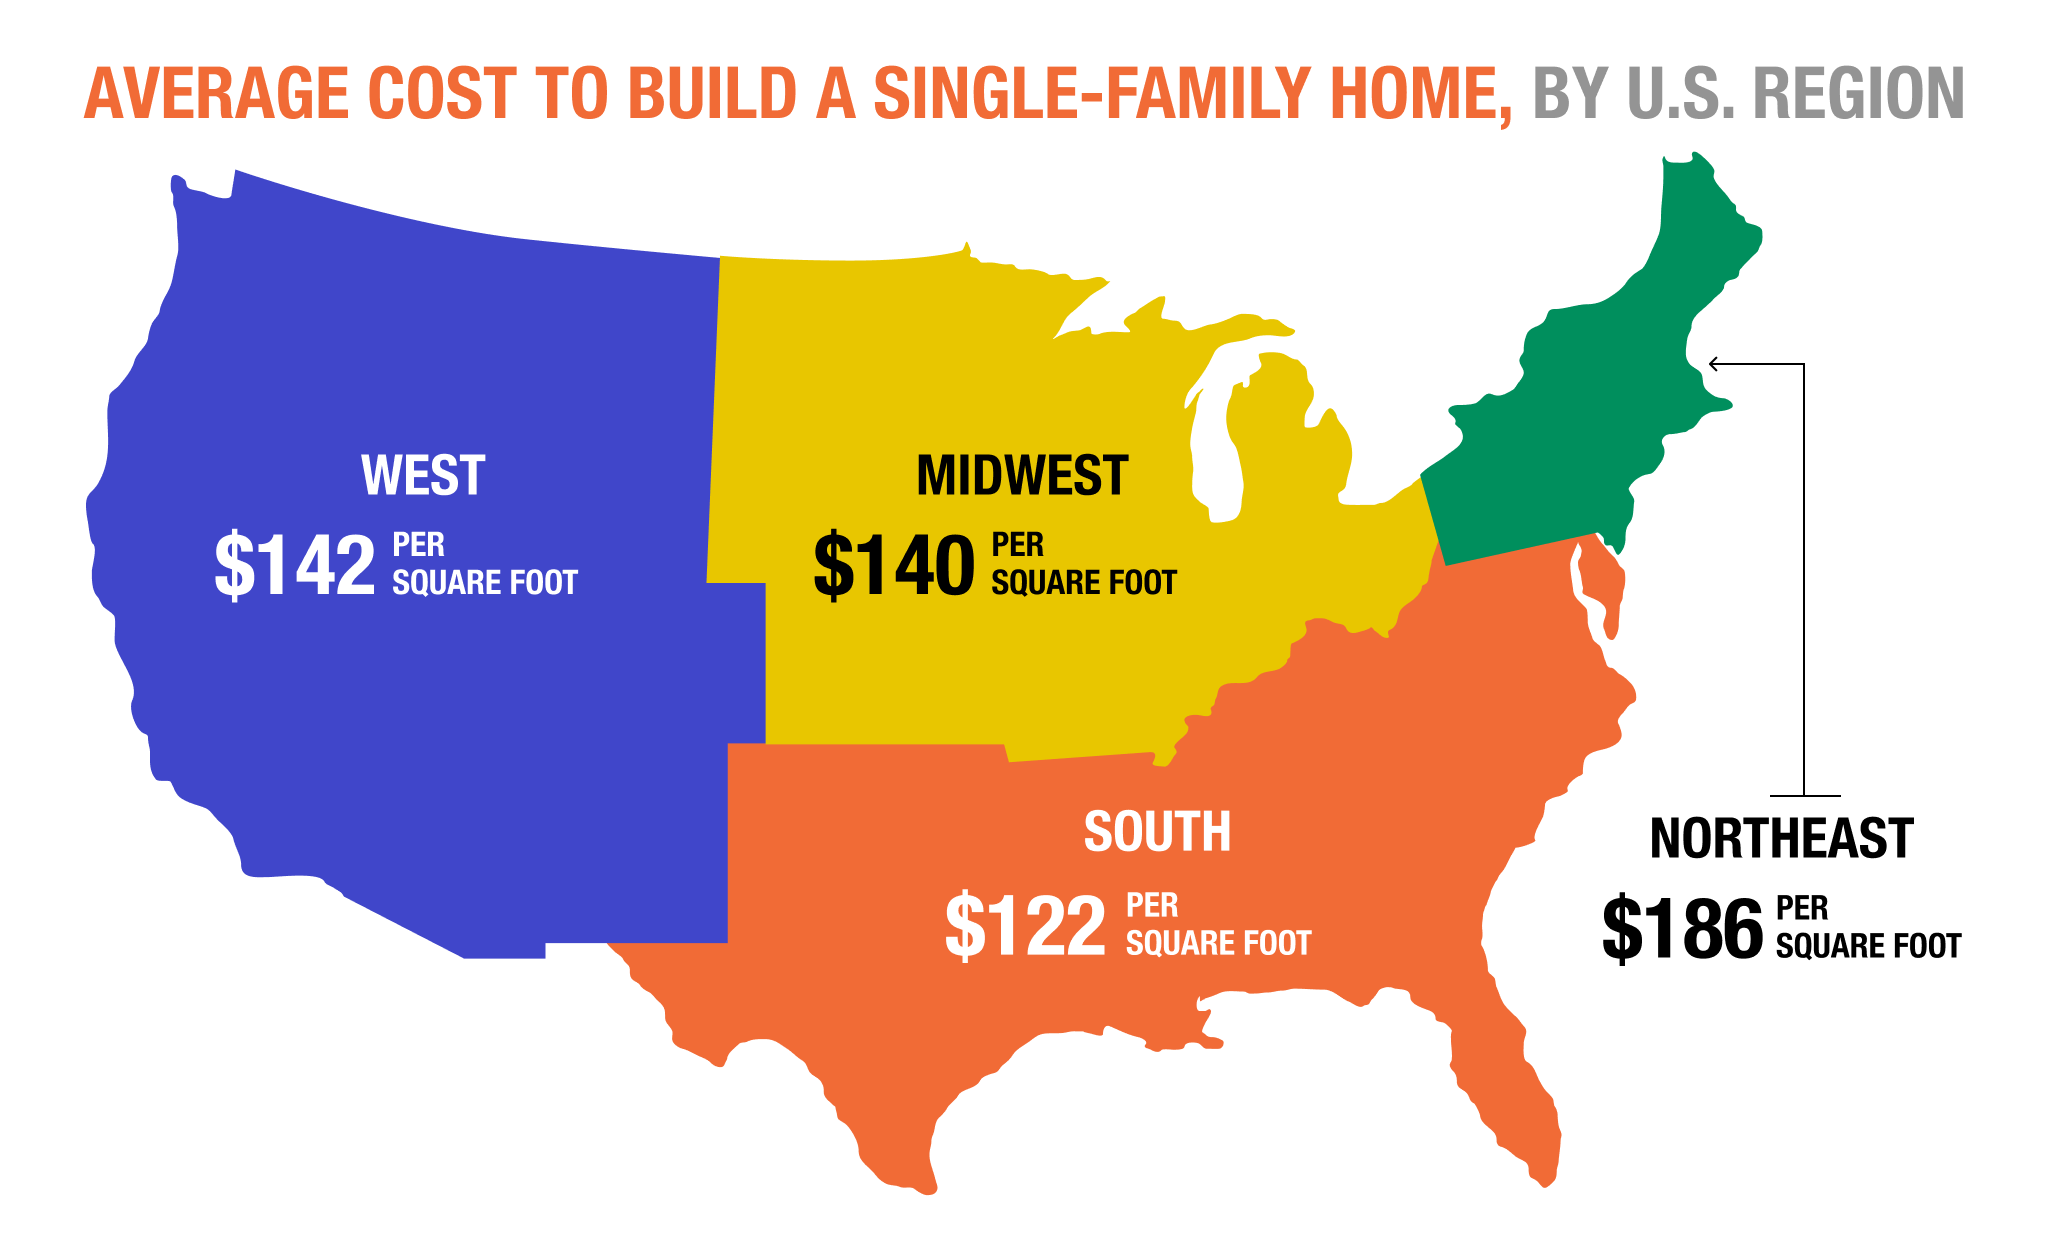 A map graphic shows the regional costs to build a single-family home.